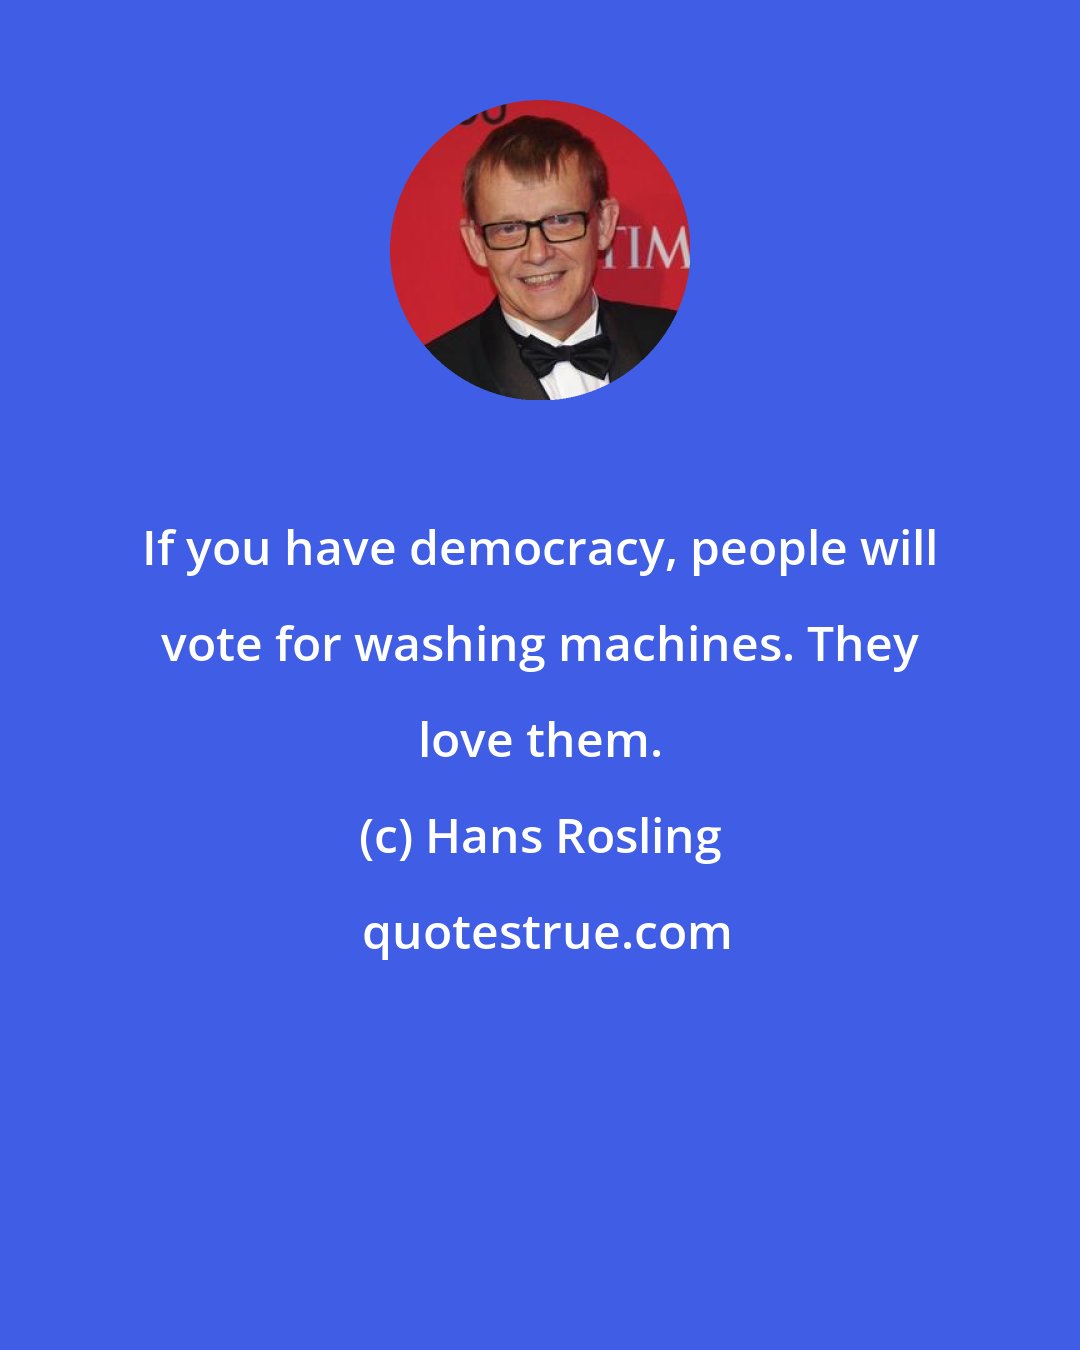 Hans Rosling: If you have democracy, people will vote for washing machines. They love them.